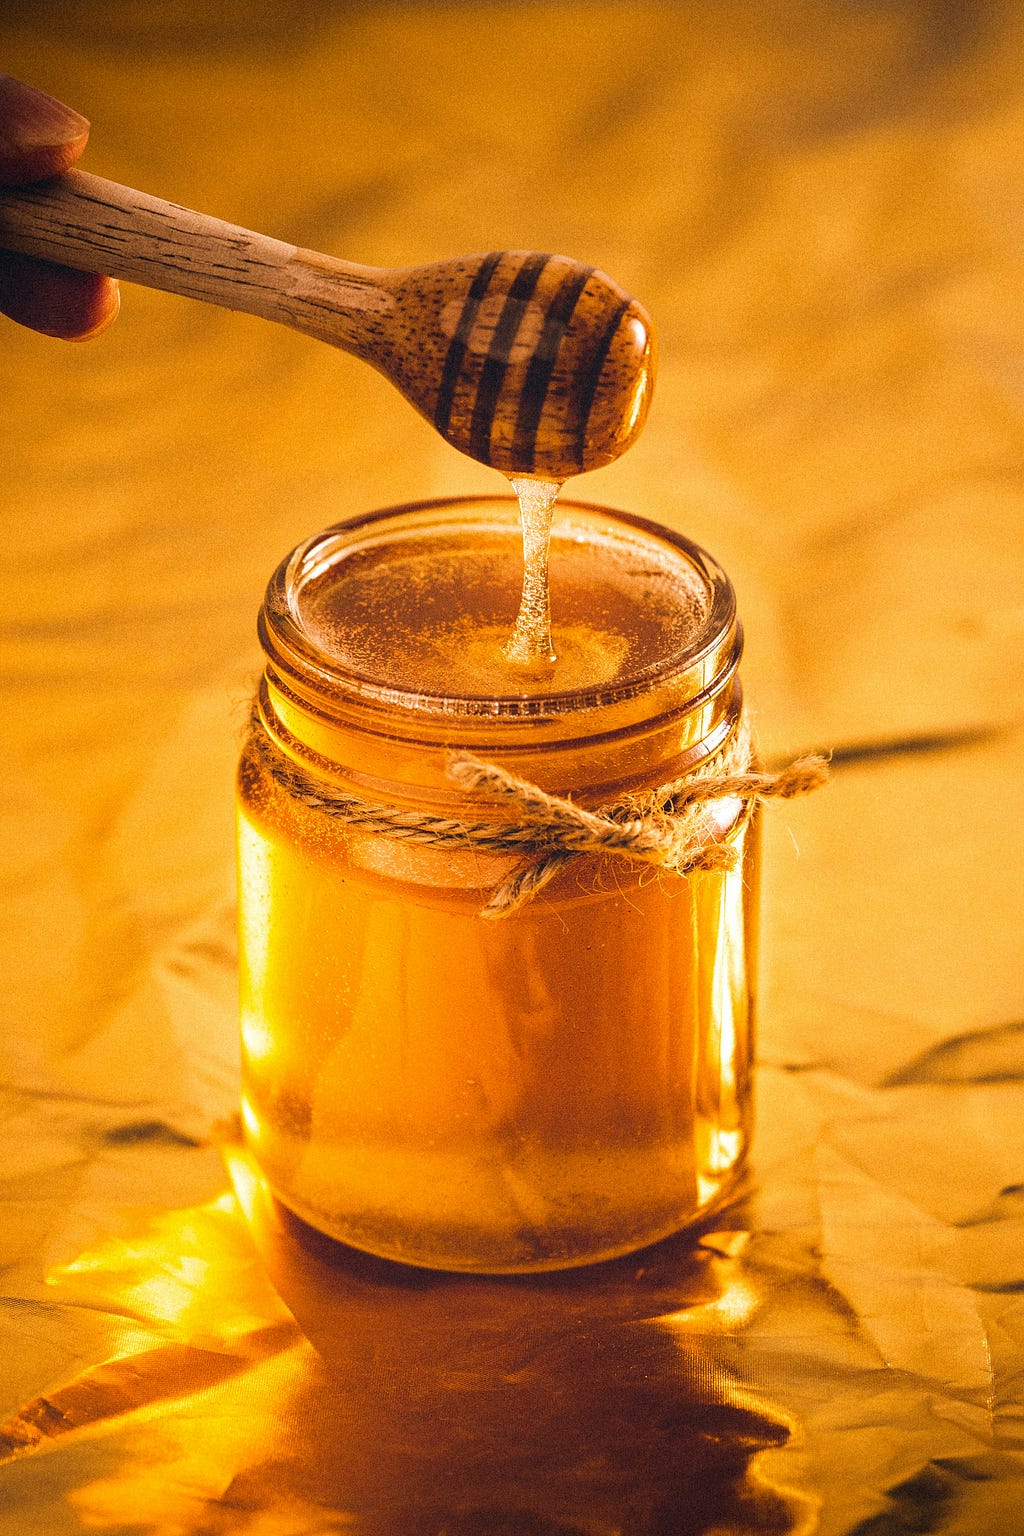 Yellow background. A big Jar full of honey. A honey dipper on top of the jar dripping honey.